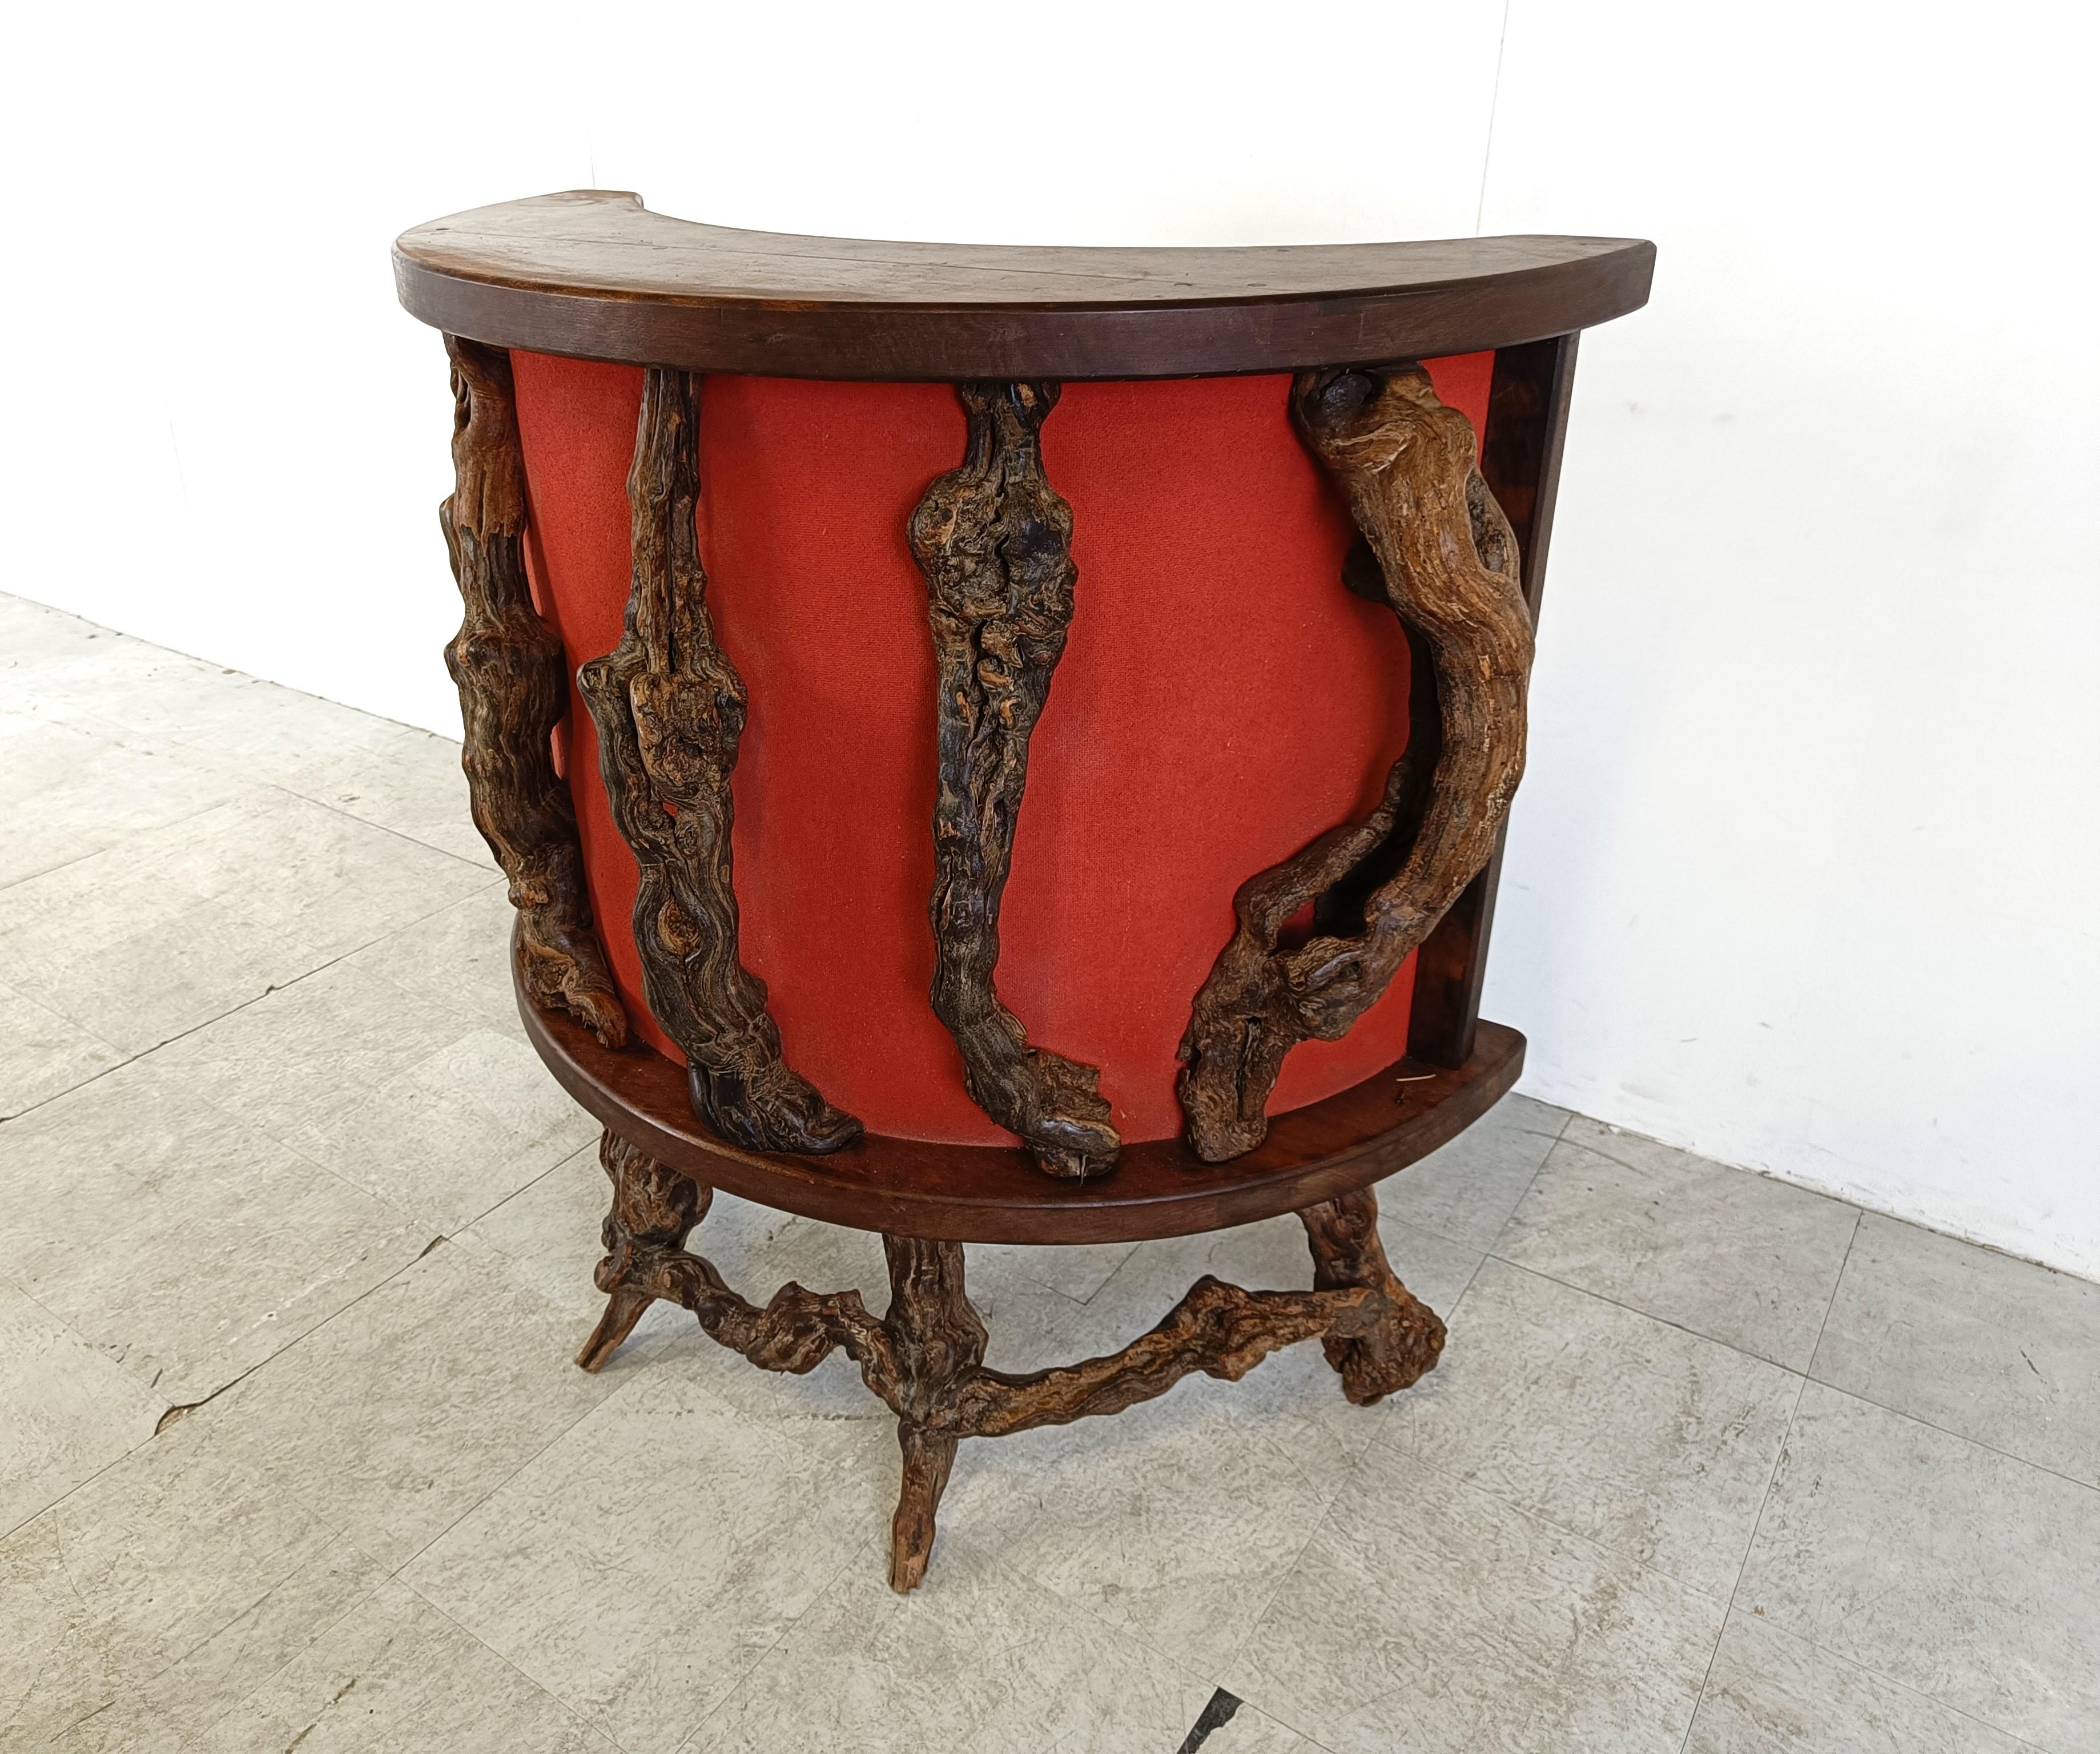 Up for sale is this rather unique bar counter made from vine wood branches.

This sculptural bar counter can be a nice decorative piece at home or a very unique piece in a wine shop.

It has a red fabric upholstered panel to beautifully contrast the